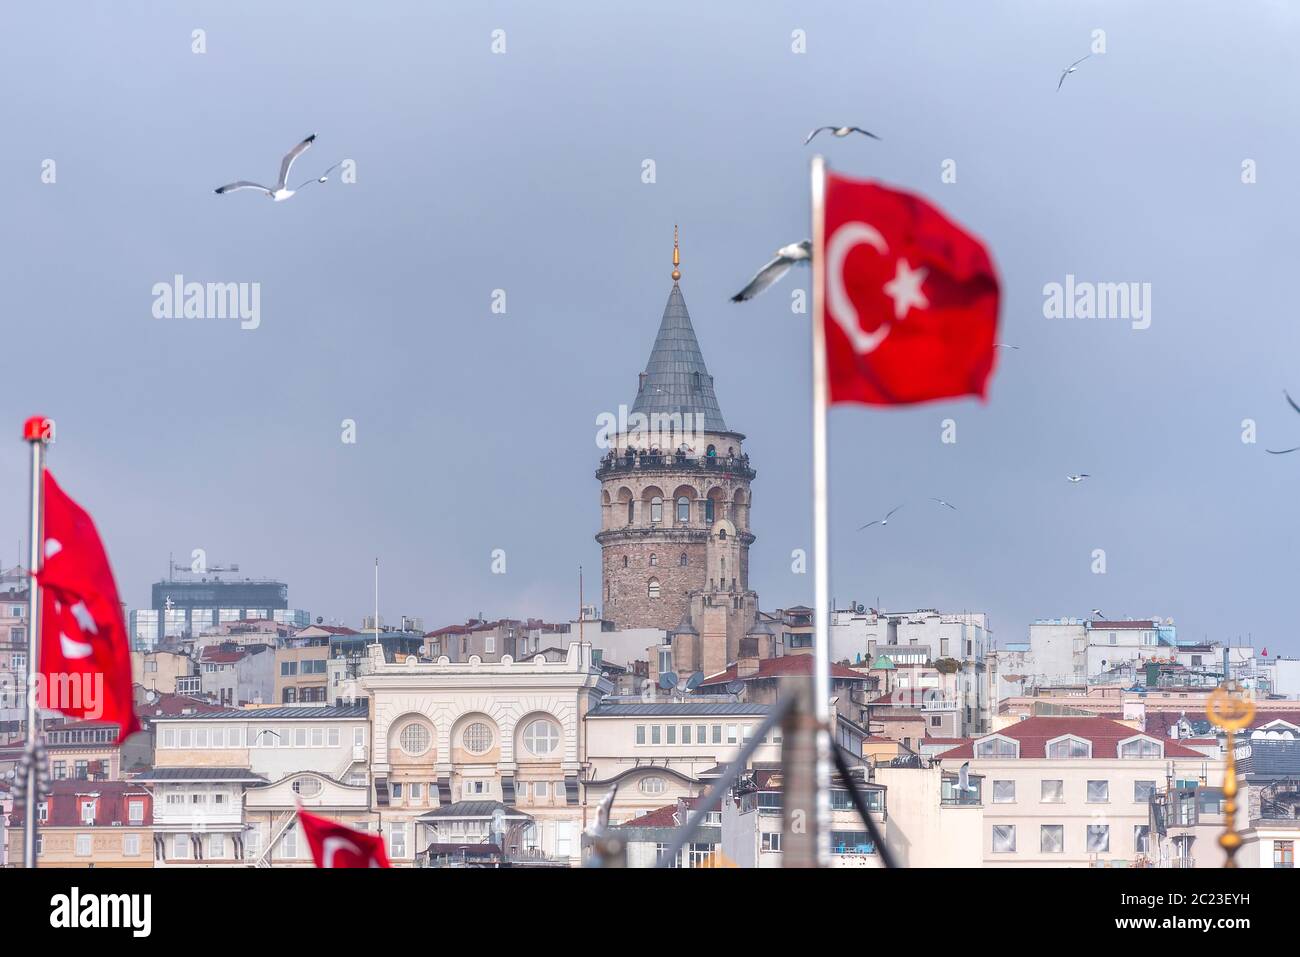 Istanbul, Galata tower and red Turkish flag, Turkey Stock Photo